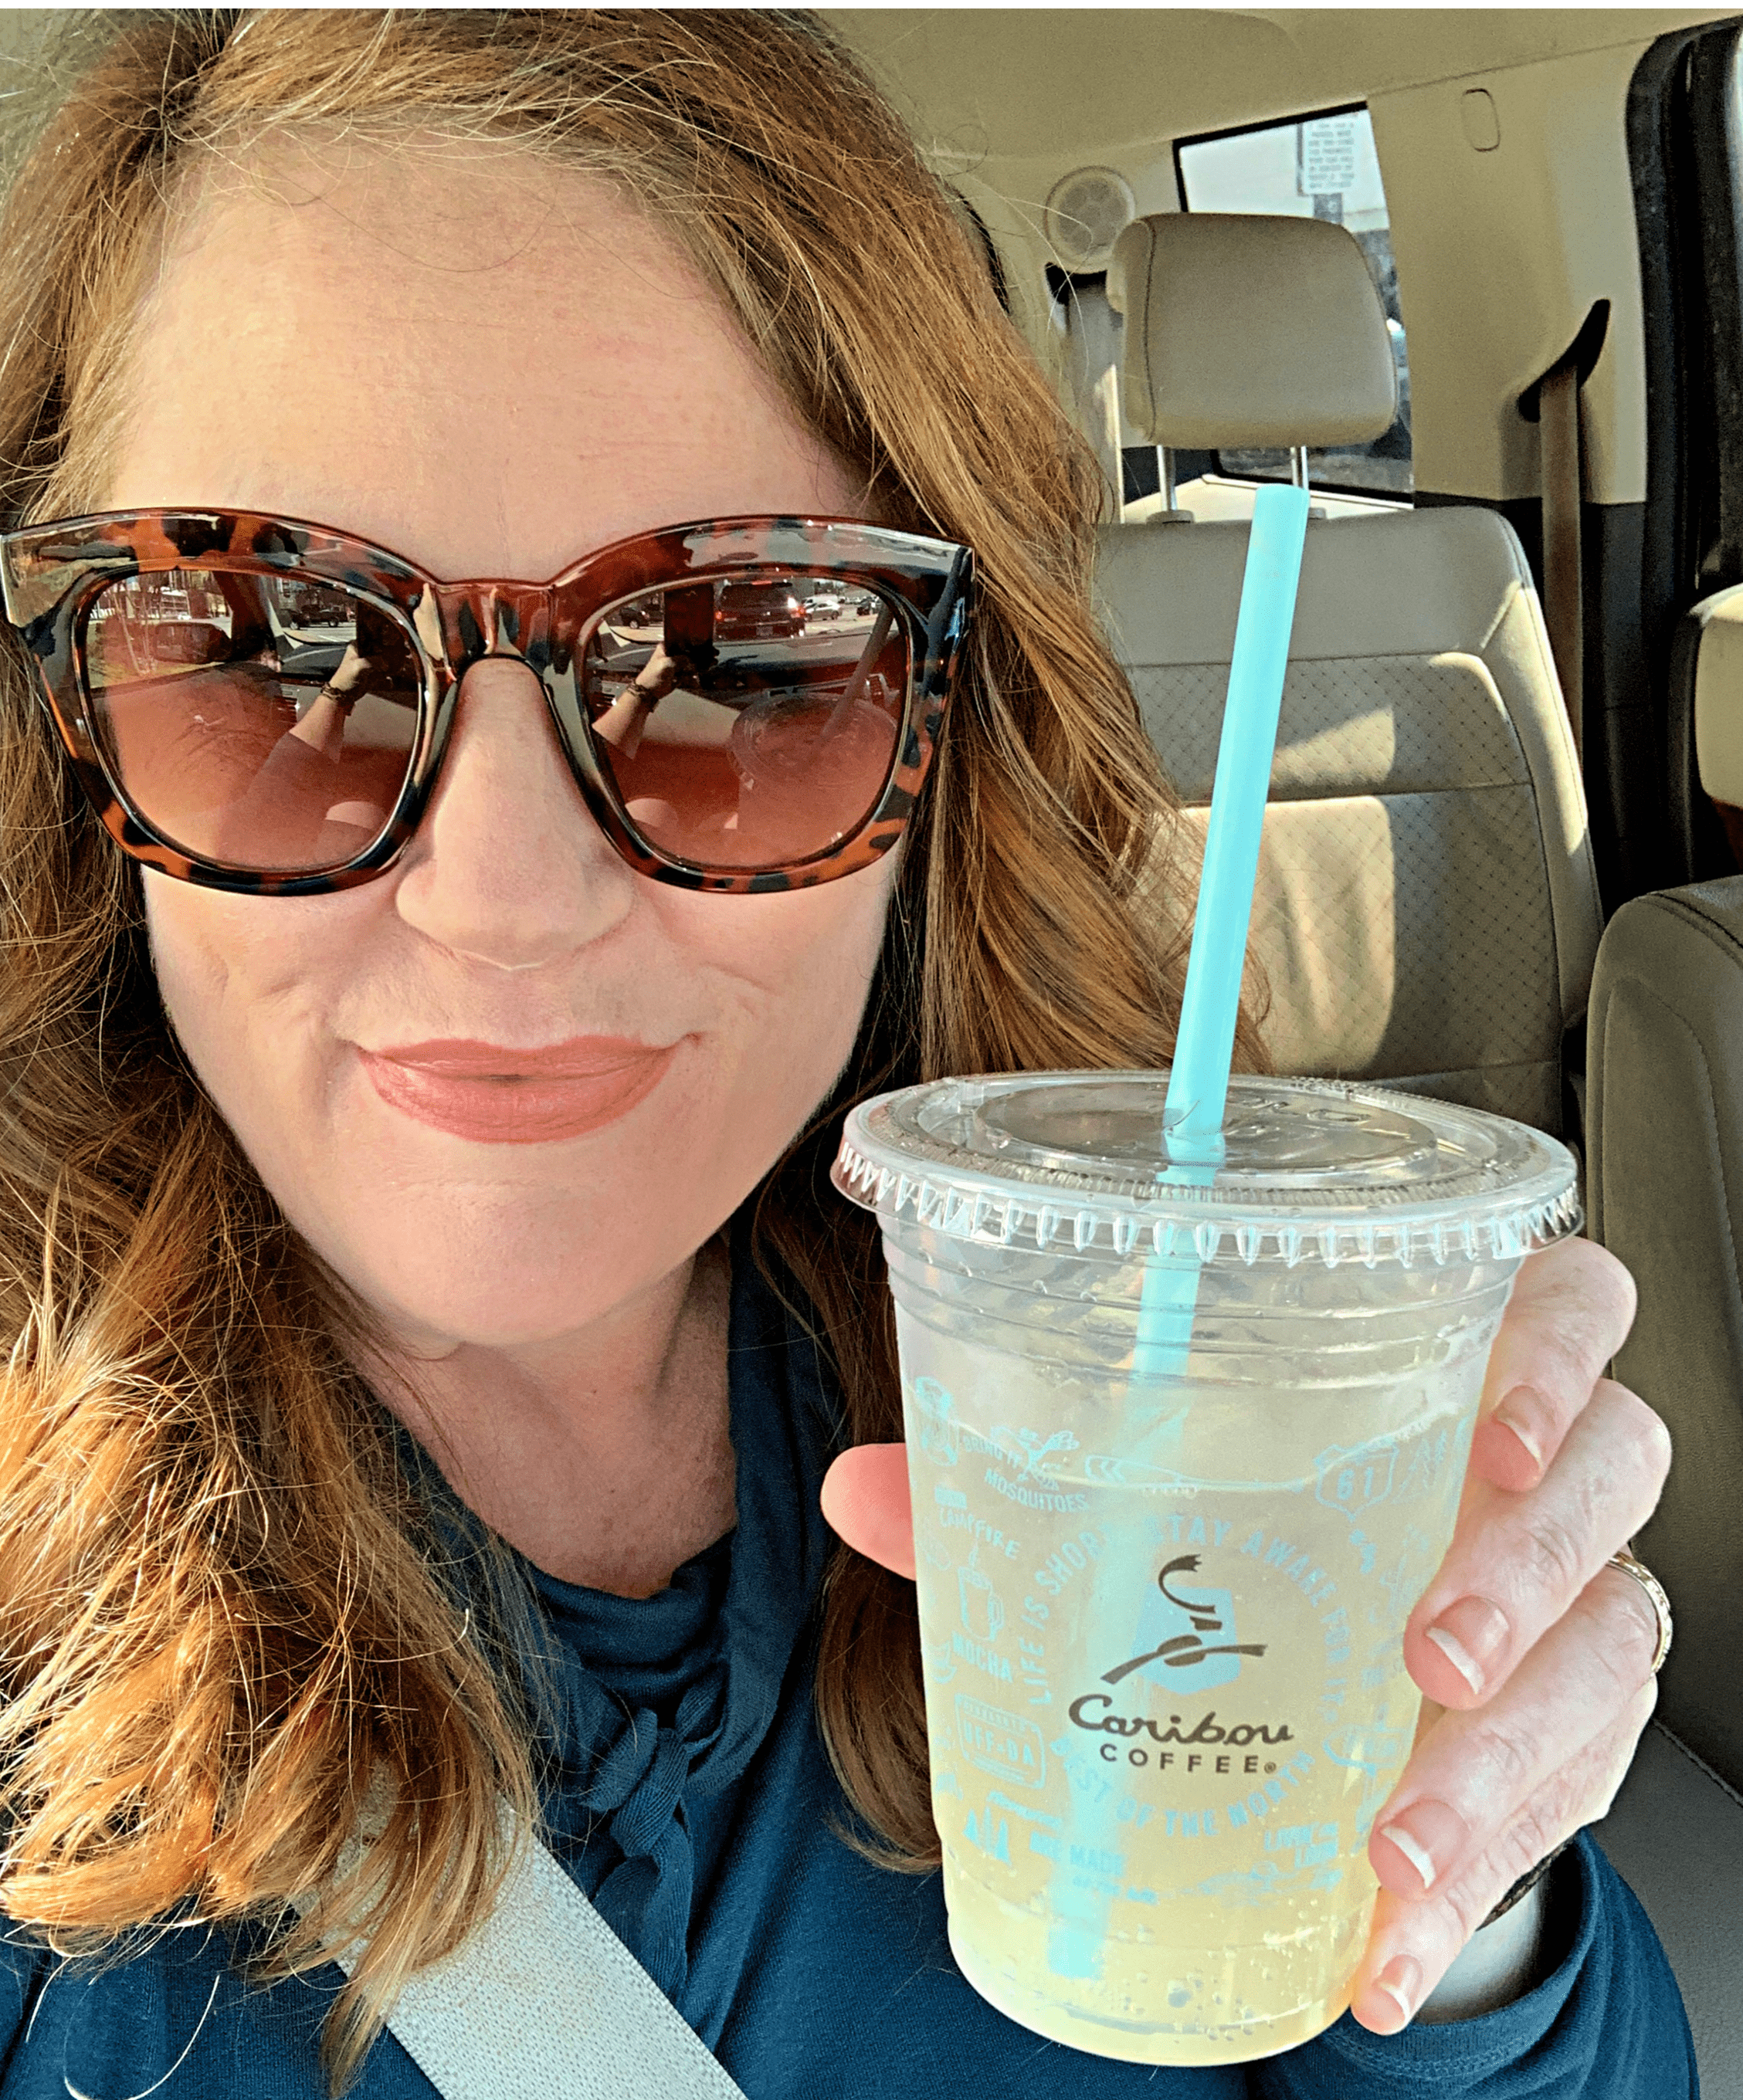 Caribou Coffee BOUsted Caffeinated Beverages